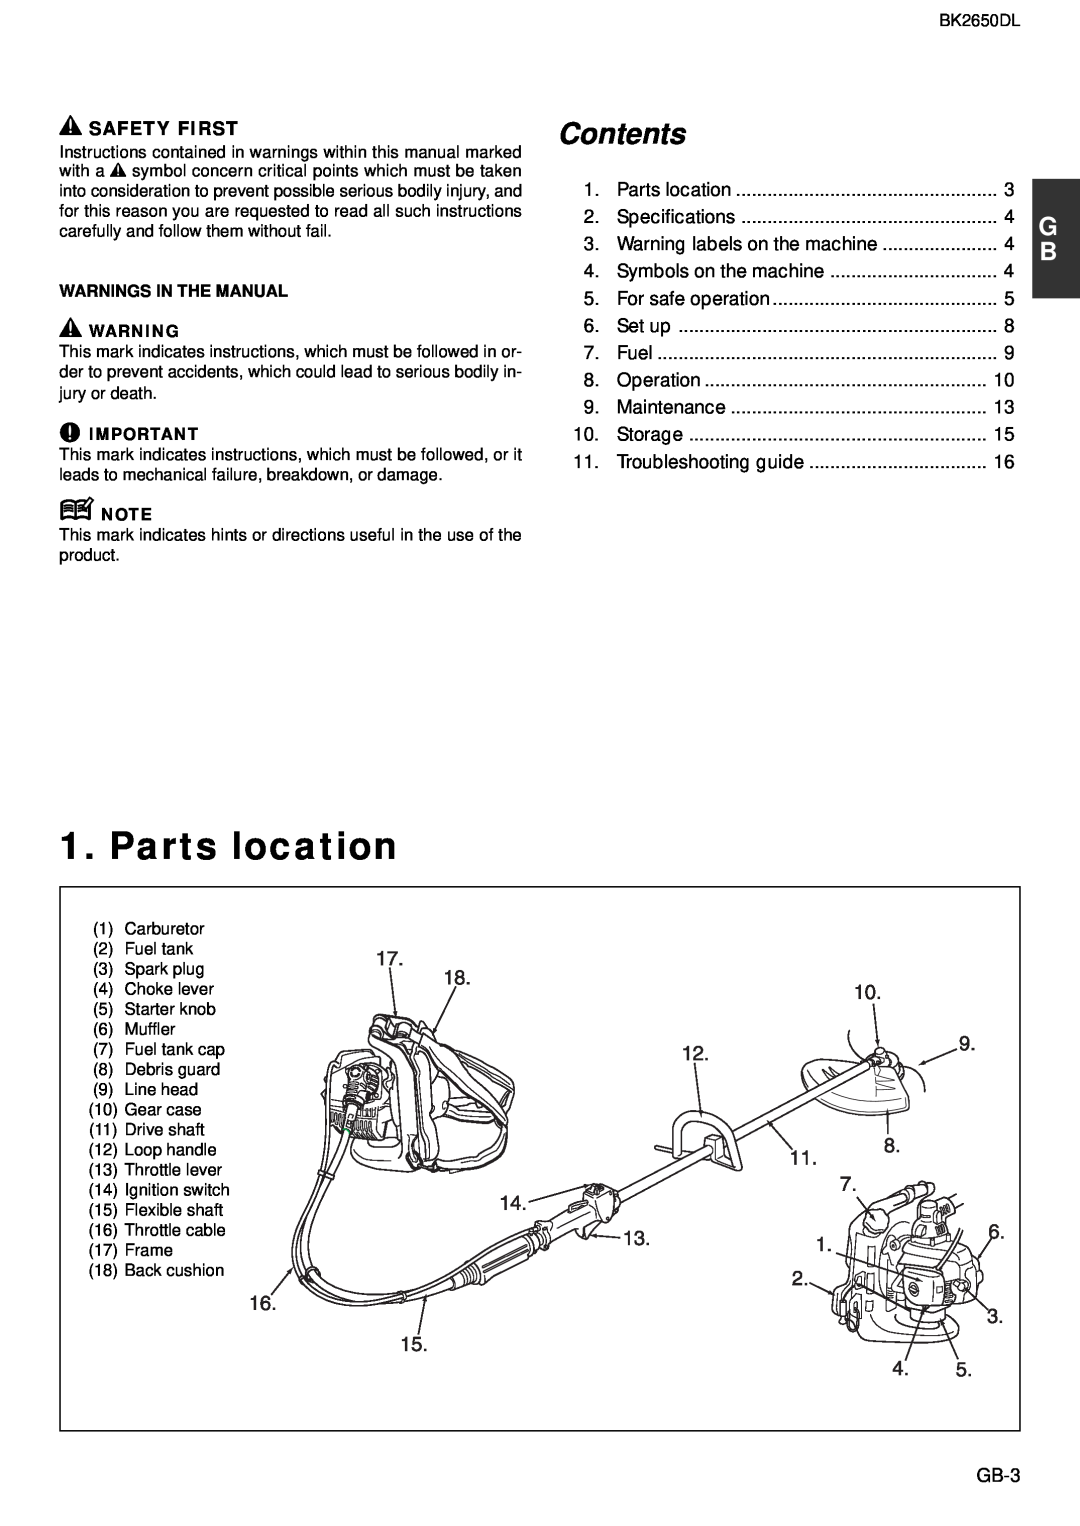 Zenoah BK2650DL owner manual Parts location, Safety First, Contents 